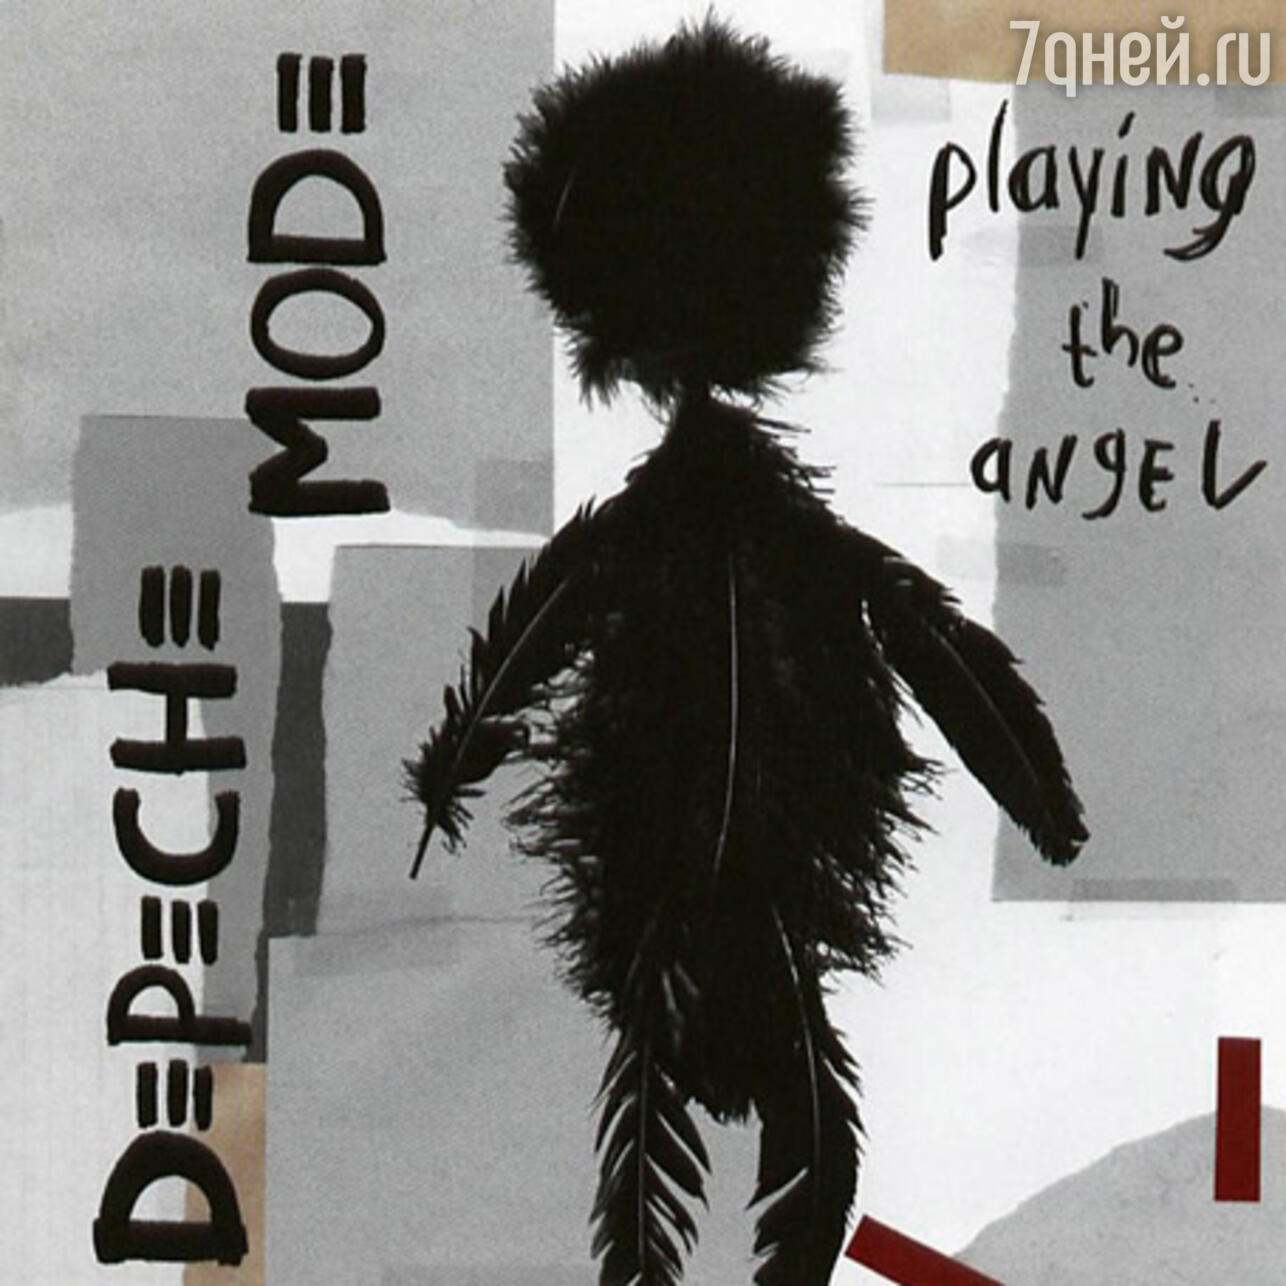   Playing the Angel  Depeche Mode